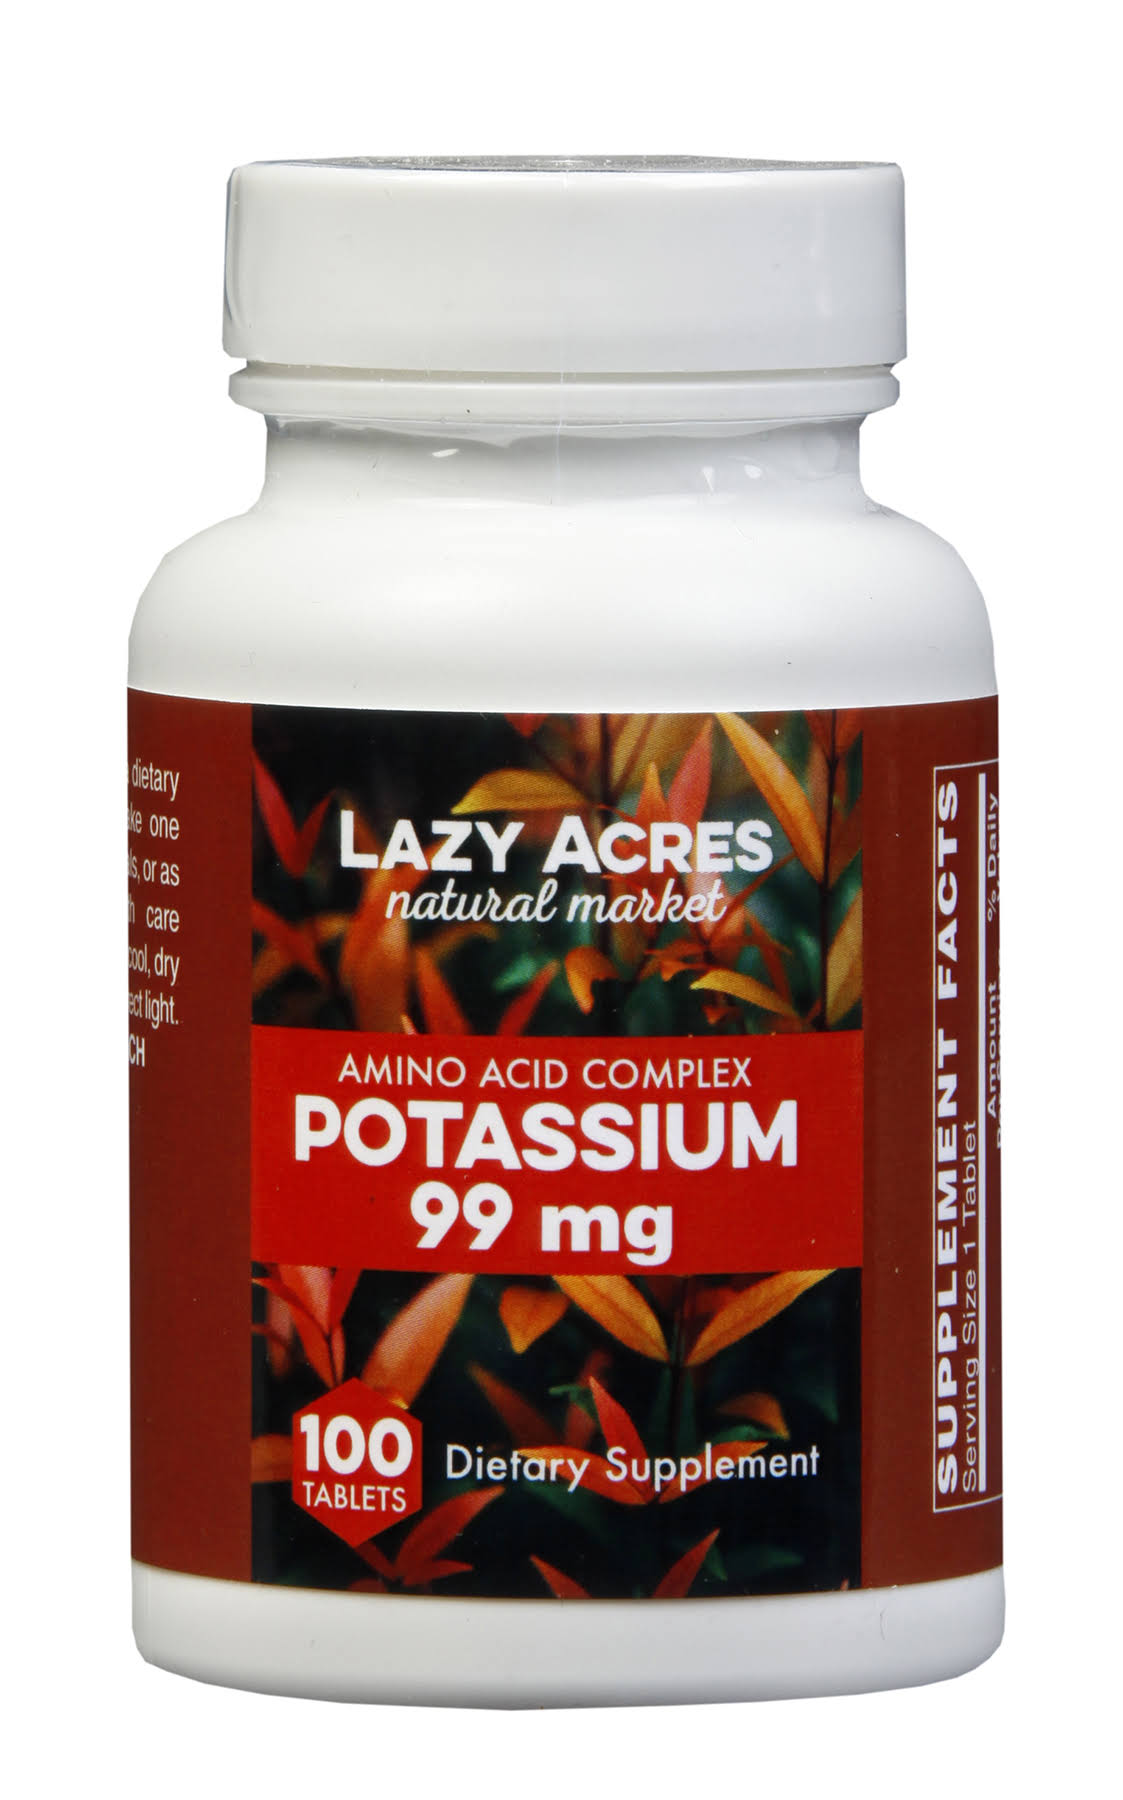 Holly Hill Health Foods, Potassium 99 mg, 100 Tablets